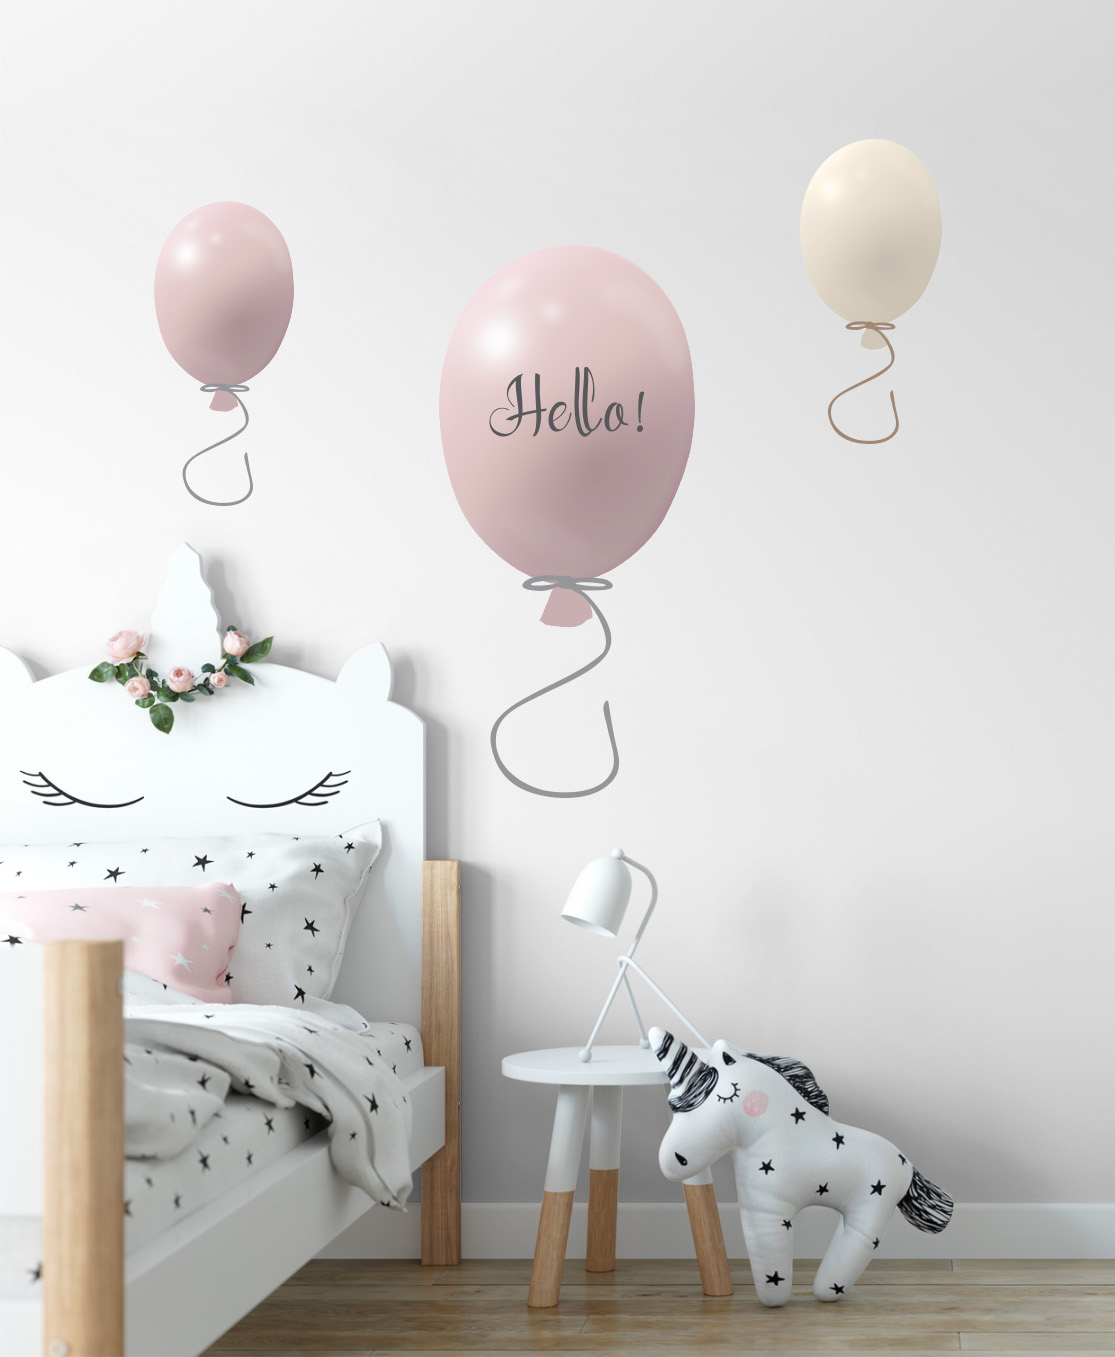 Wall sticker party balloons set of 3, powder rose Wall sticker party balloons set of 3, powder rose